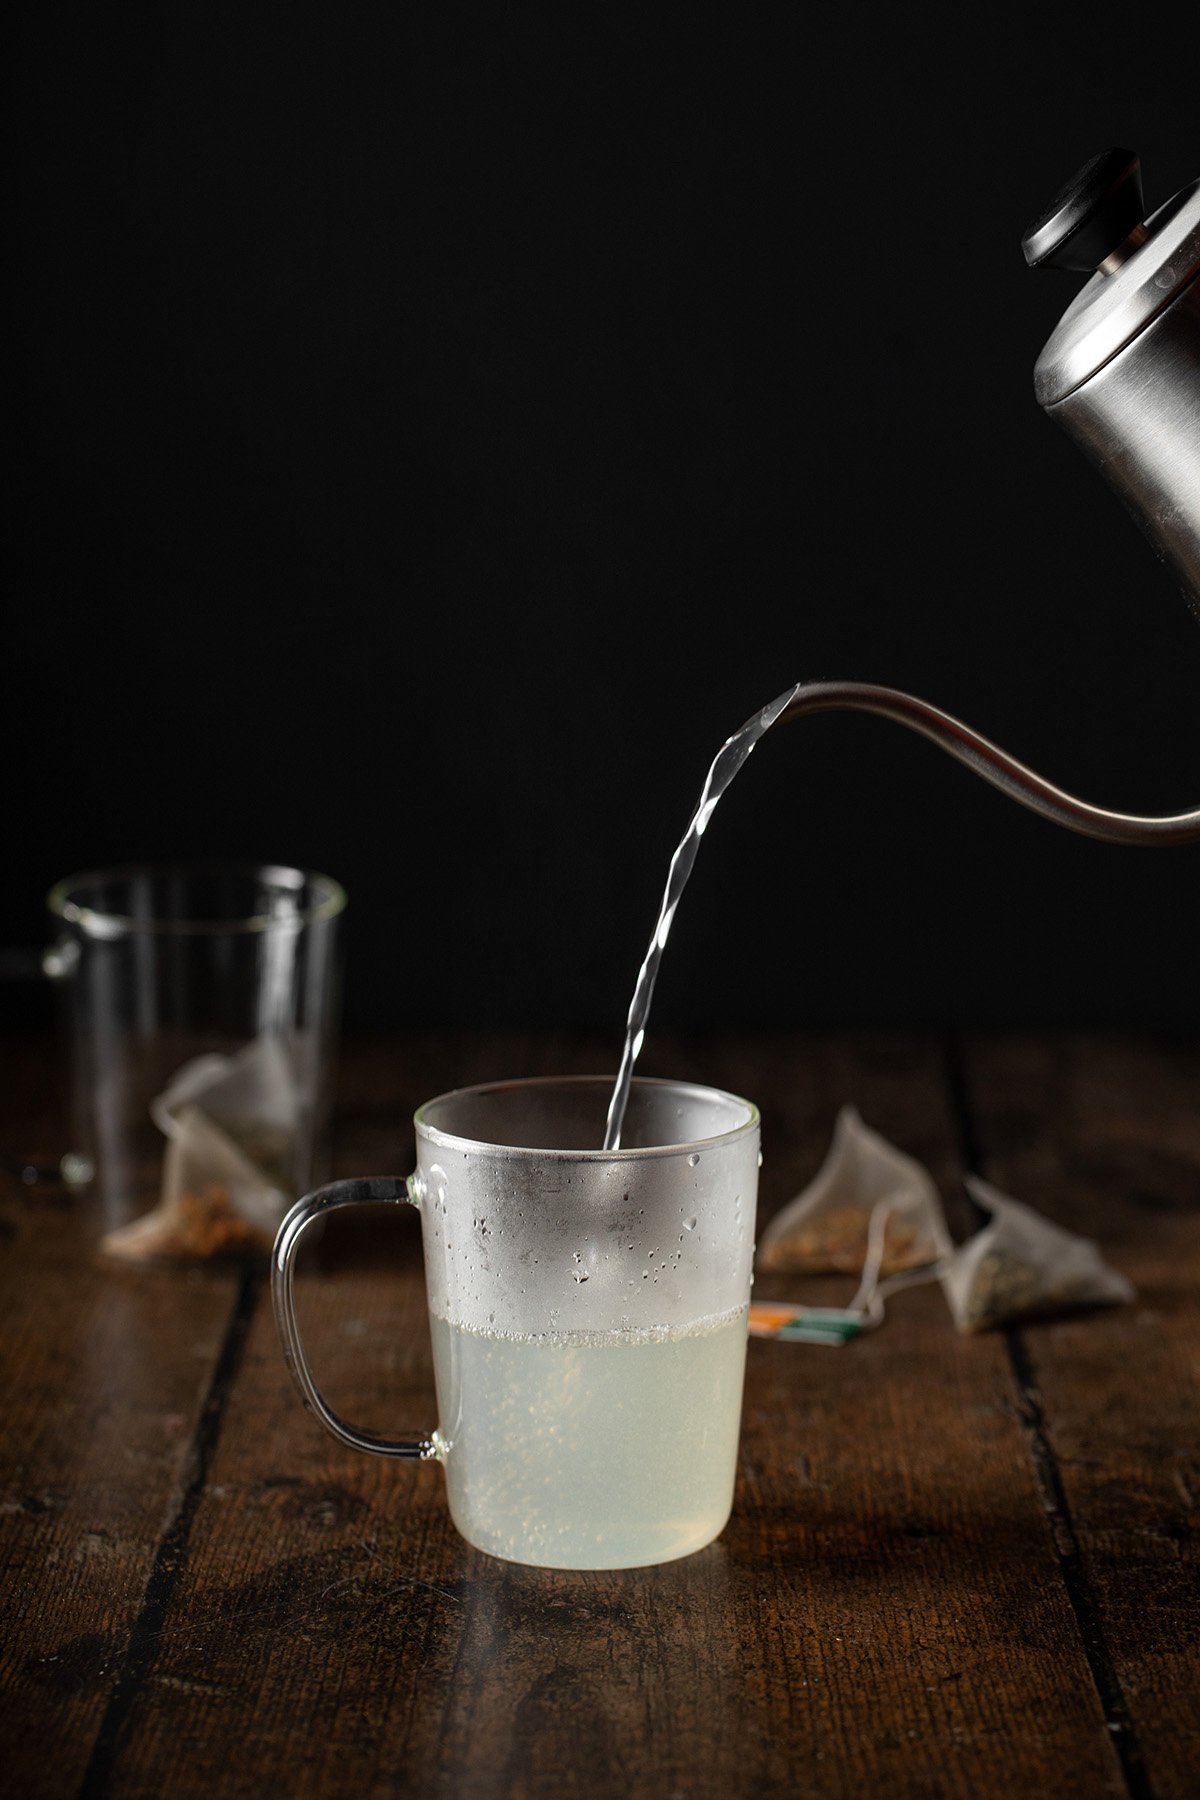 water and lemonade being poured out of a gooseneck kettle into a glass mug